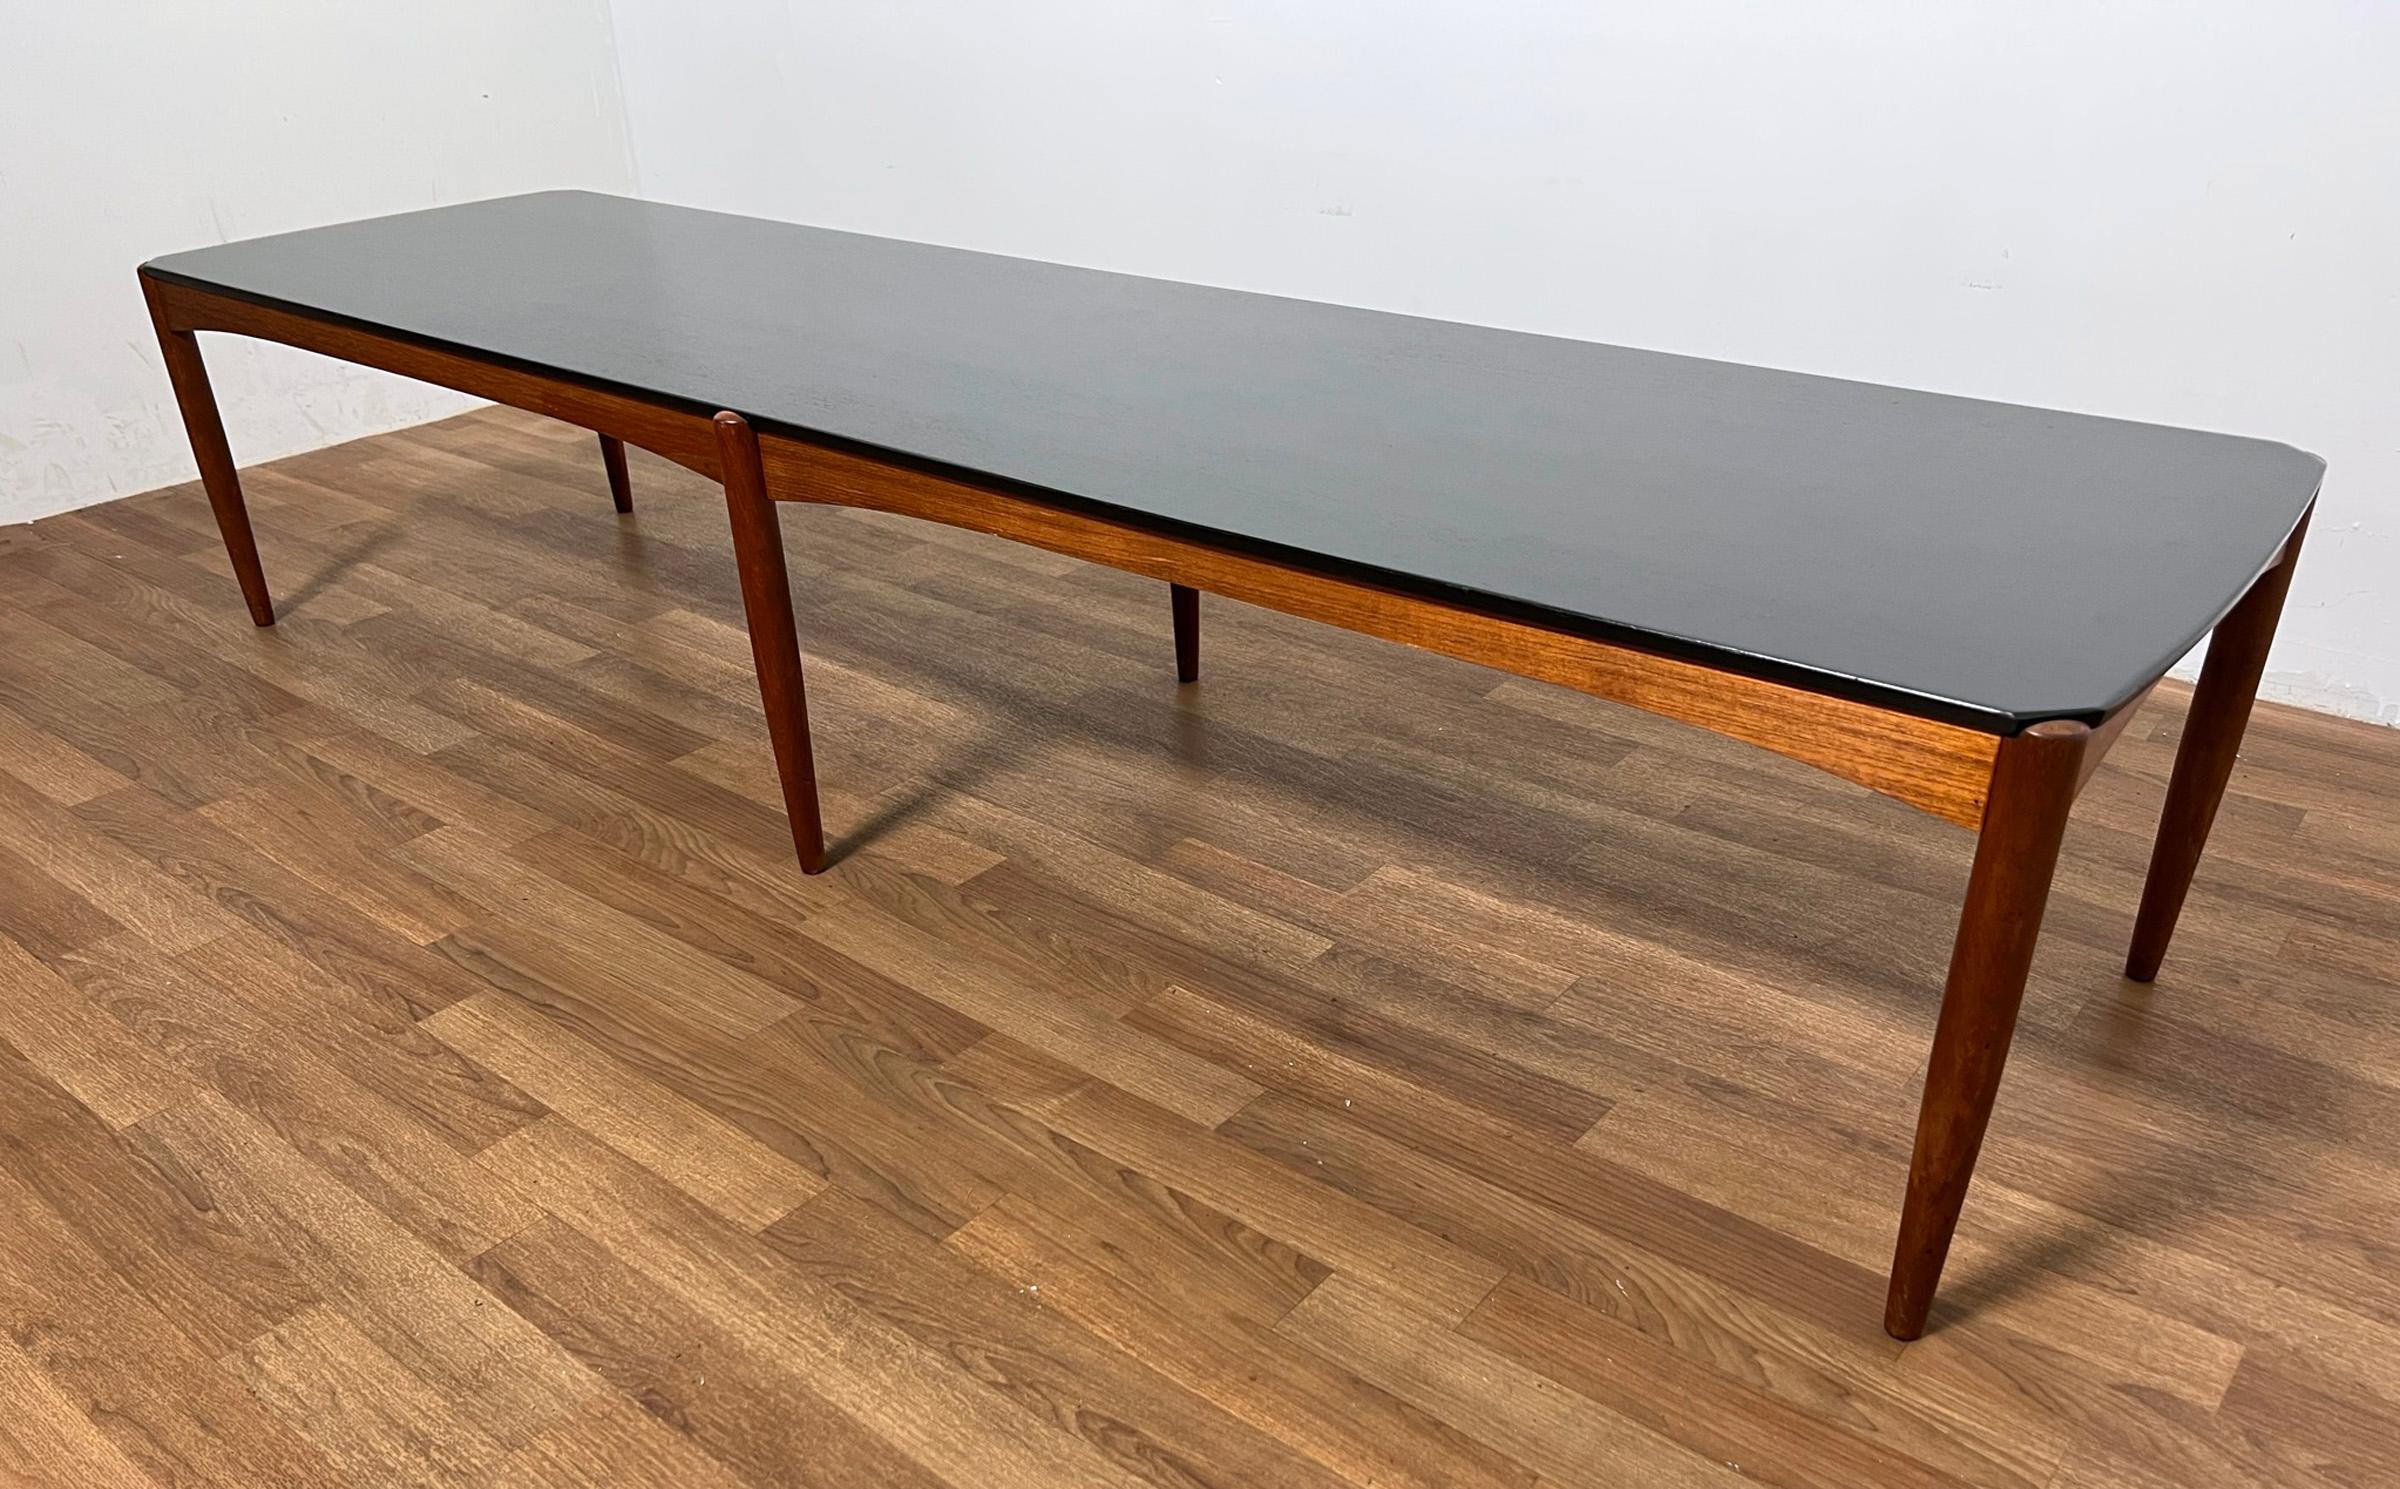 A rare bench form coffee table in teak with ebonized top by Folke Ohlsson for Dux, made in Sweden circa 1960s.